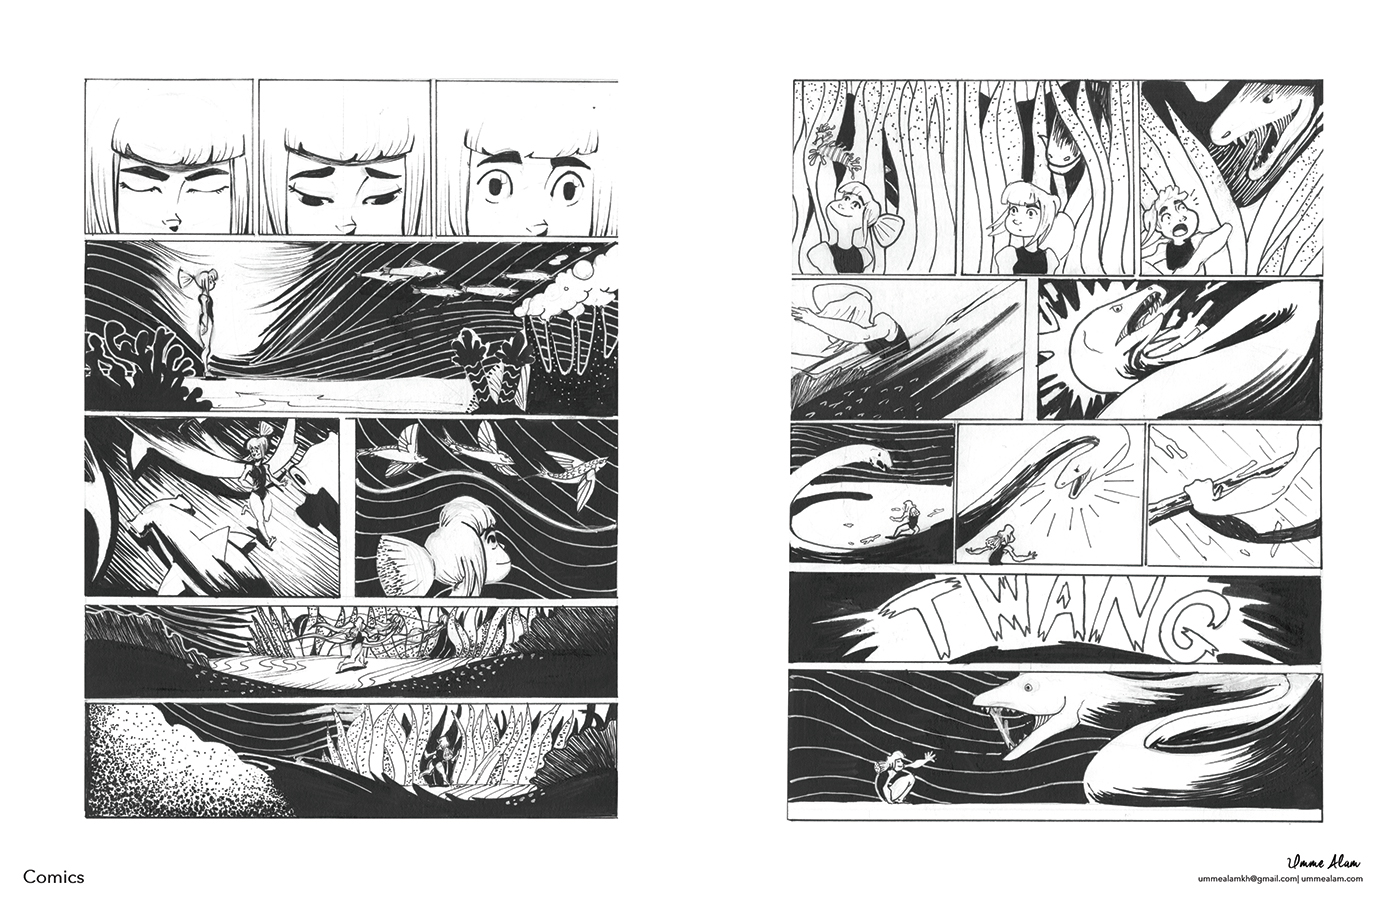 comics comicstrips ILLUSTRATION  storyboarding   inks Ghosts tigers